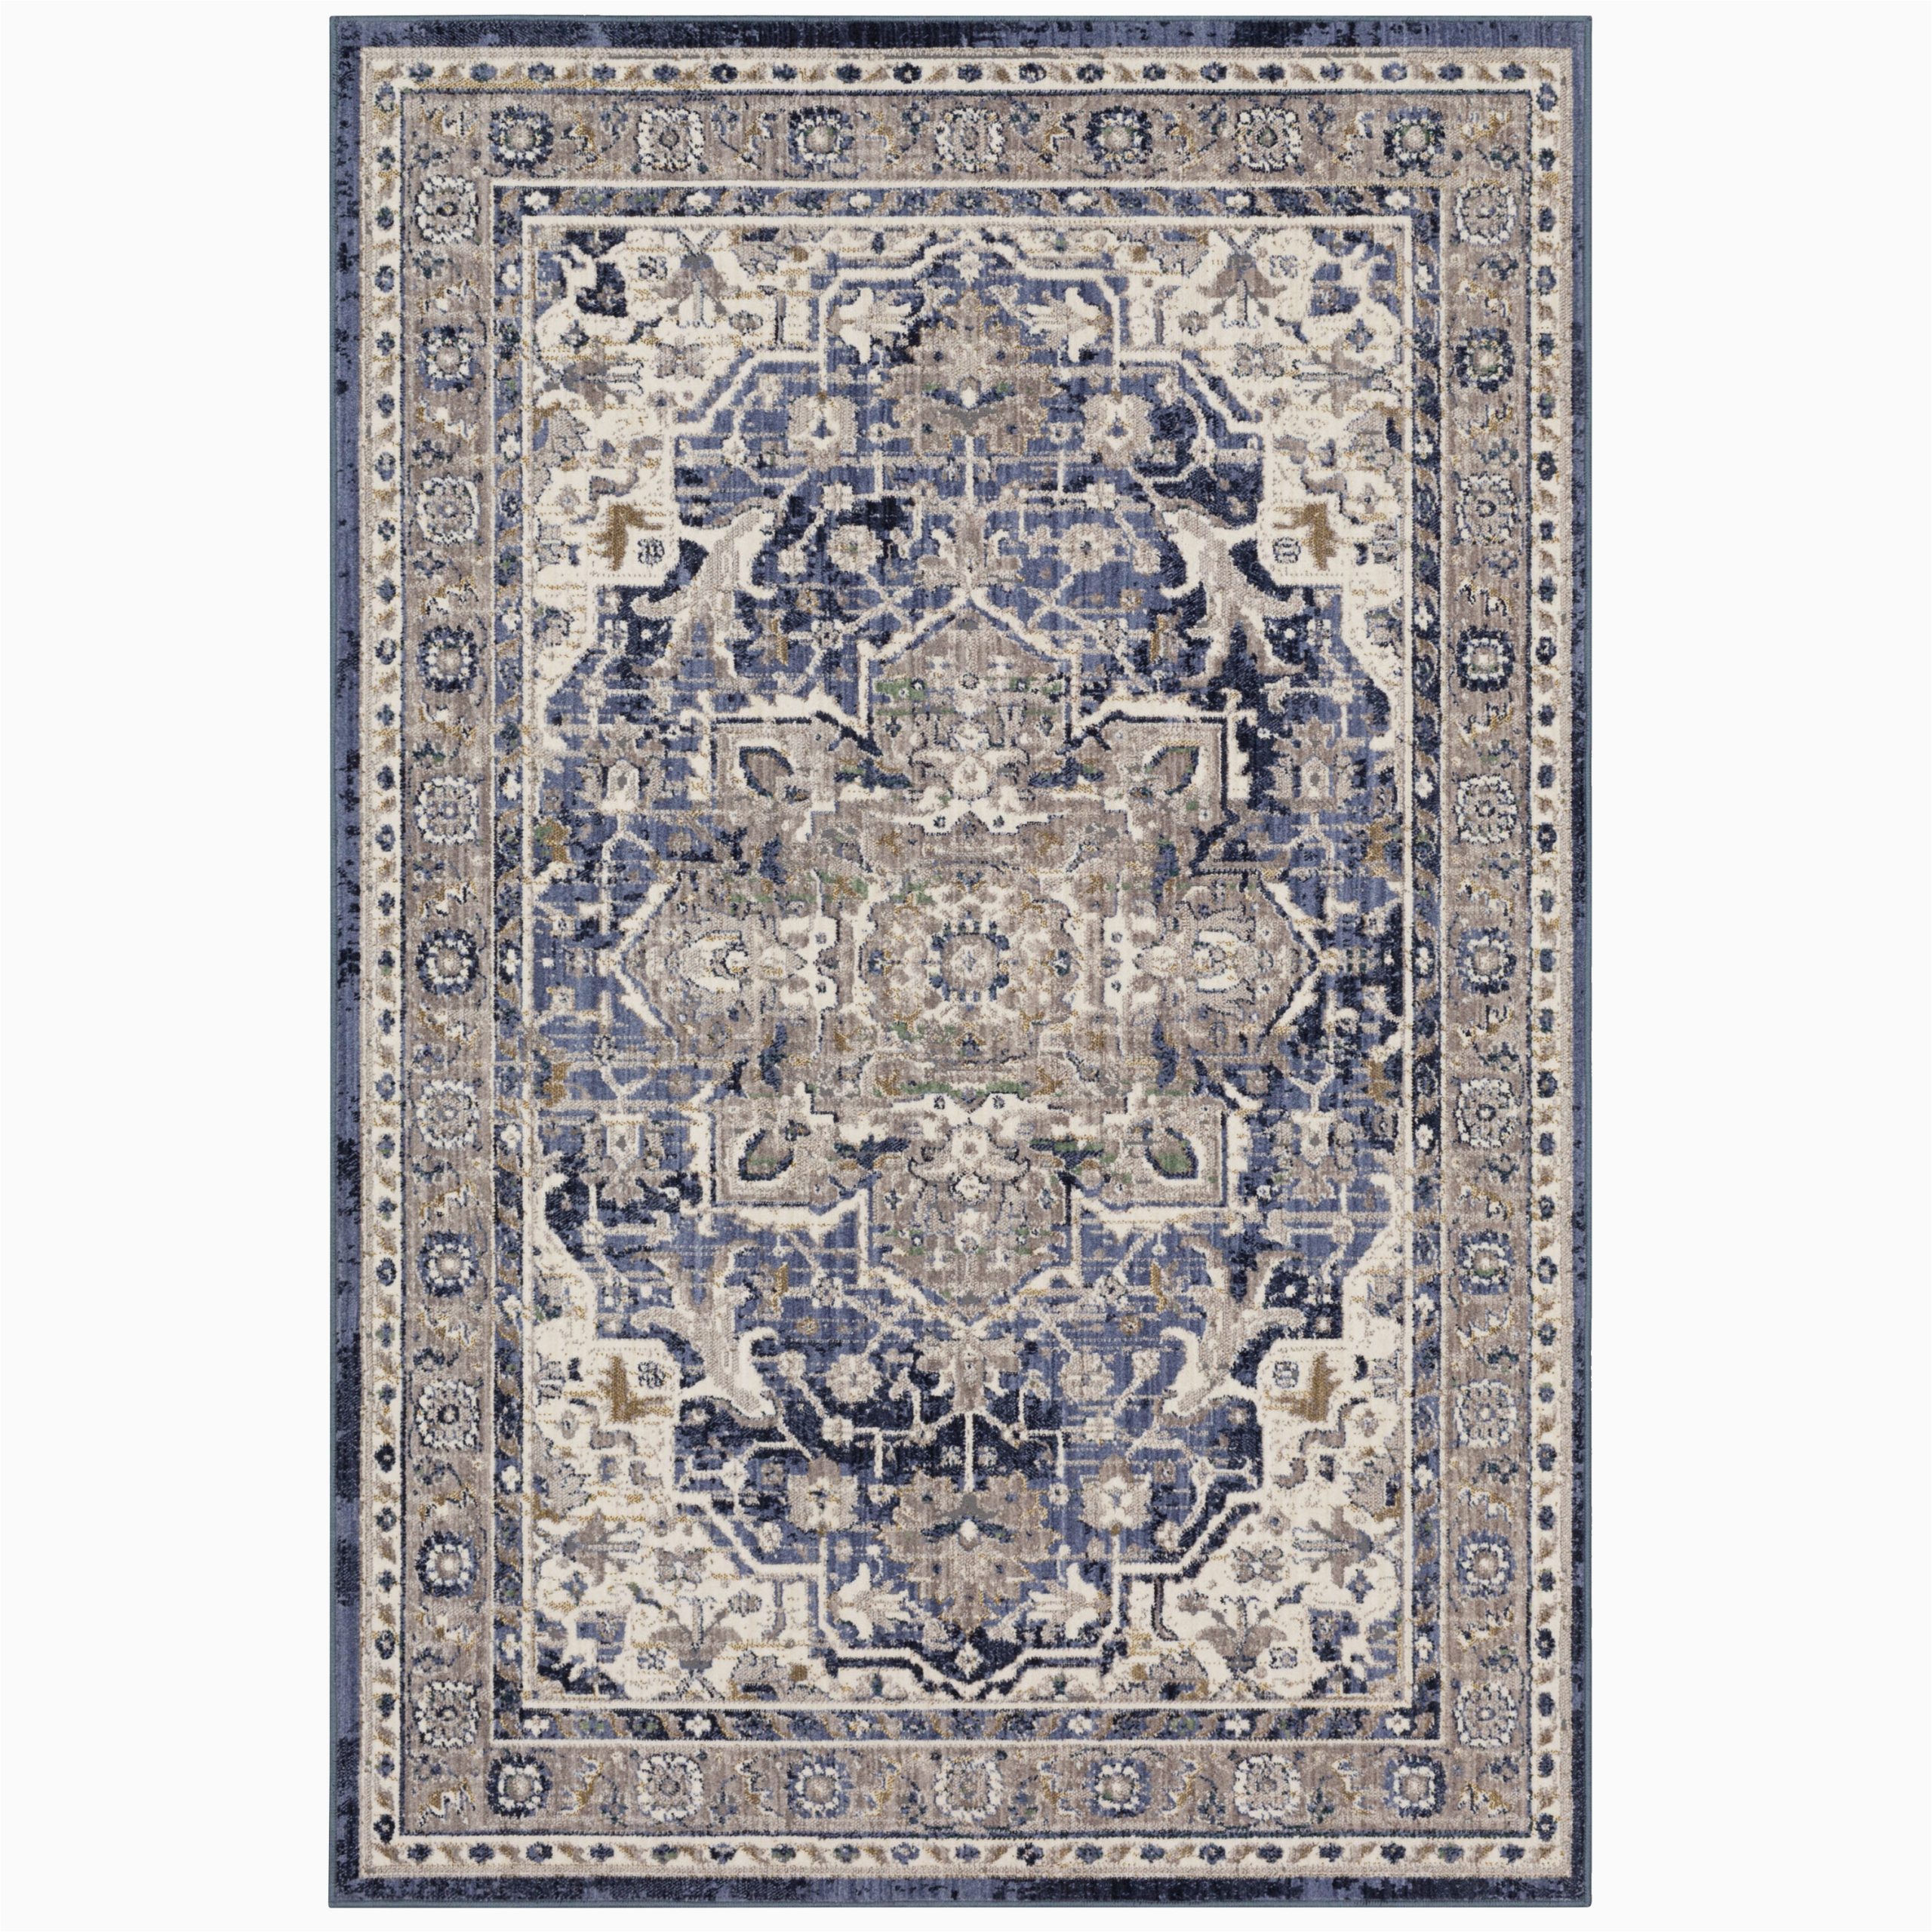 French Country Blue Rugs Allen   Roth Evelyn 4 X 6 Blue Indoor Geometric French Country …